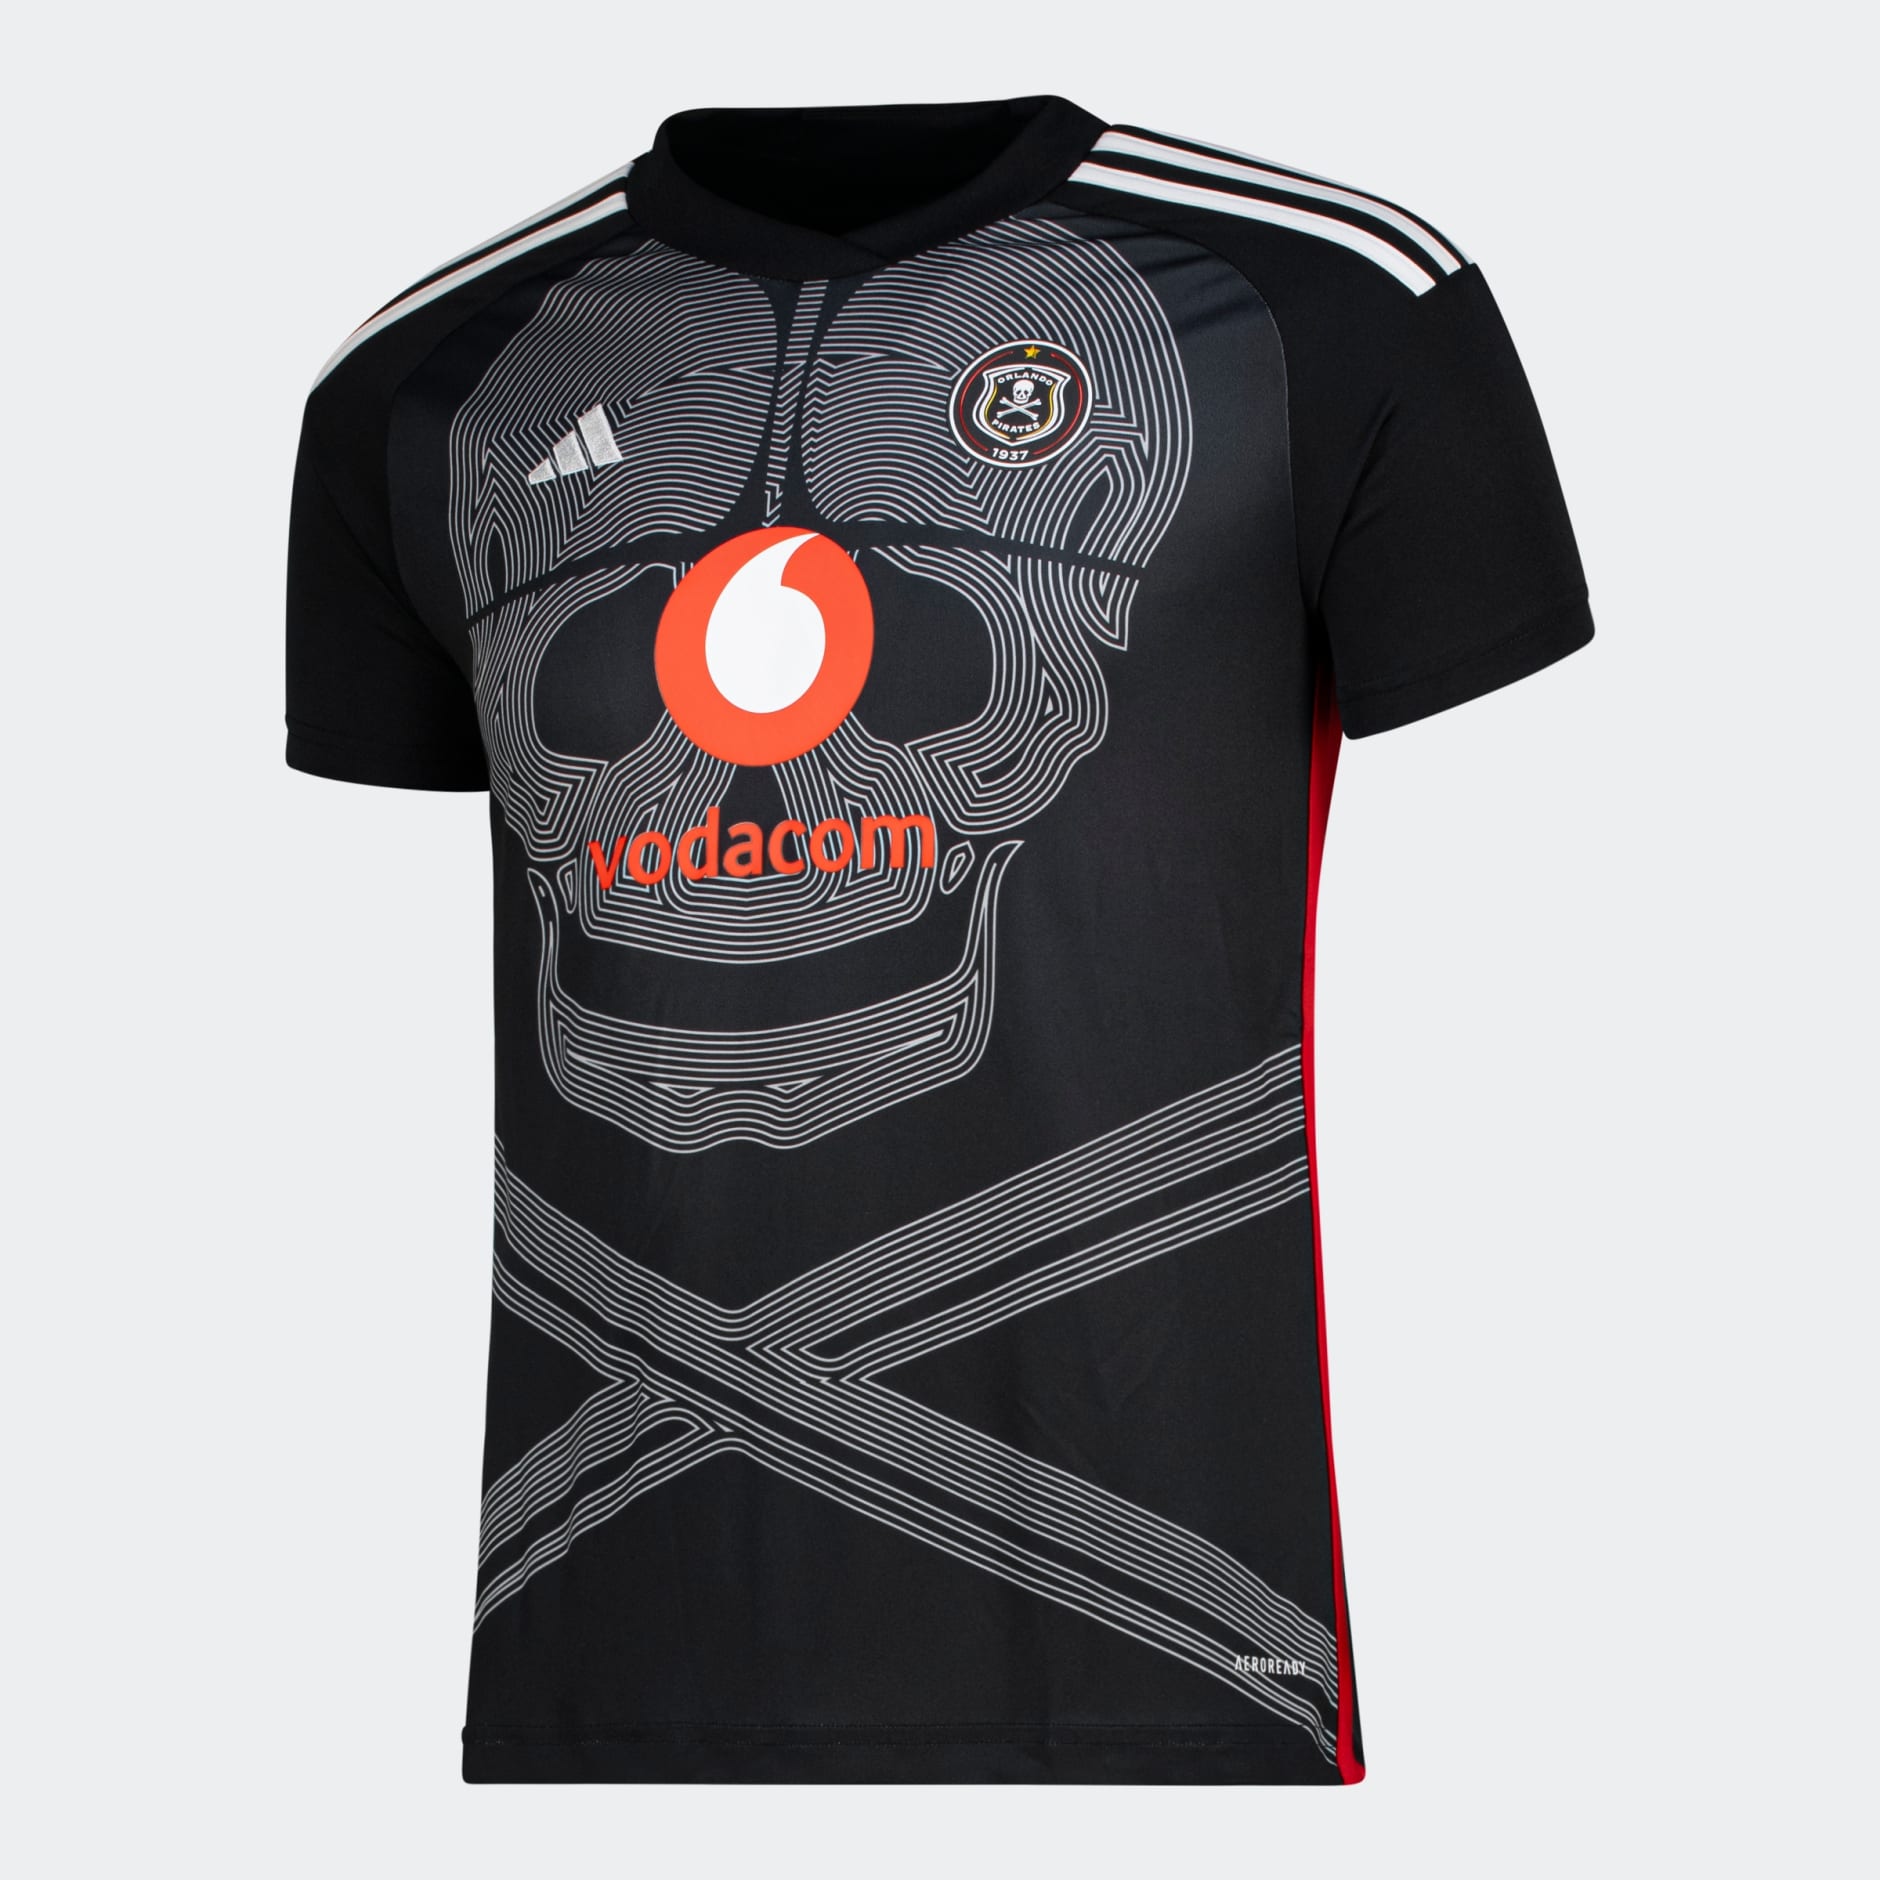 The concept behind the new Pirates jersey and the R1 000 price tag